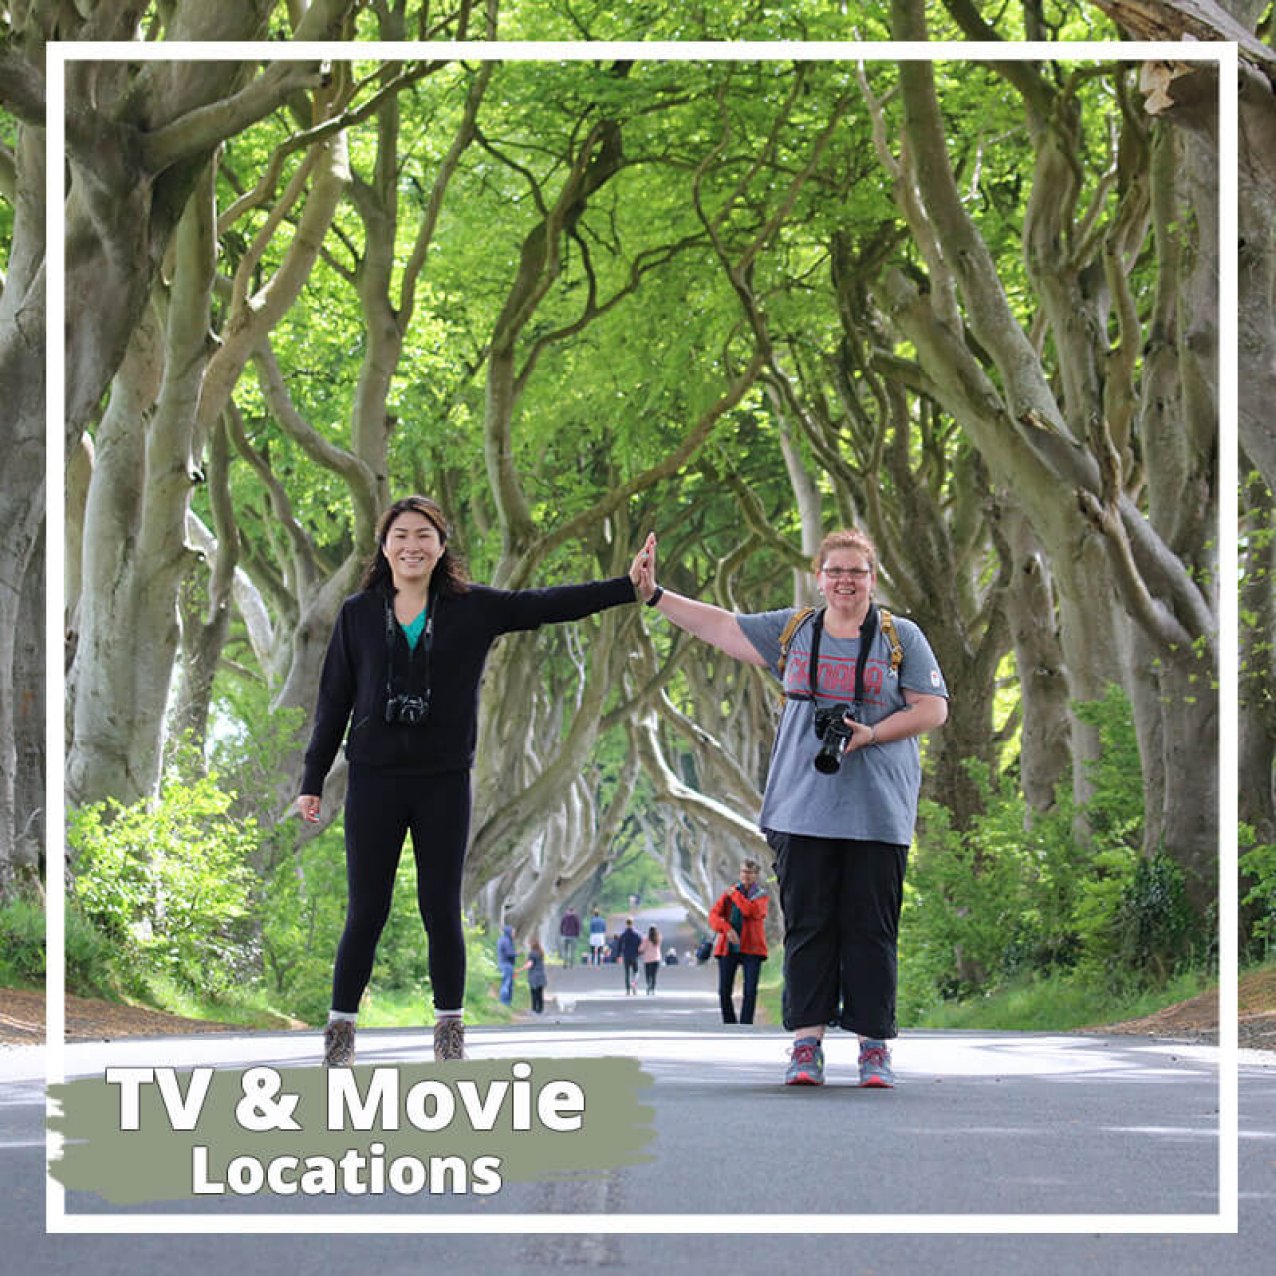 Text: Tv & Movie Locations with 2 tour guests at the Dark Hedges in Northern Ireland